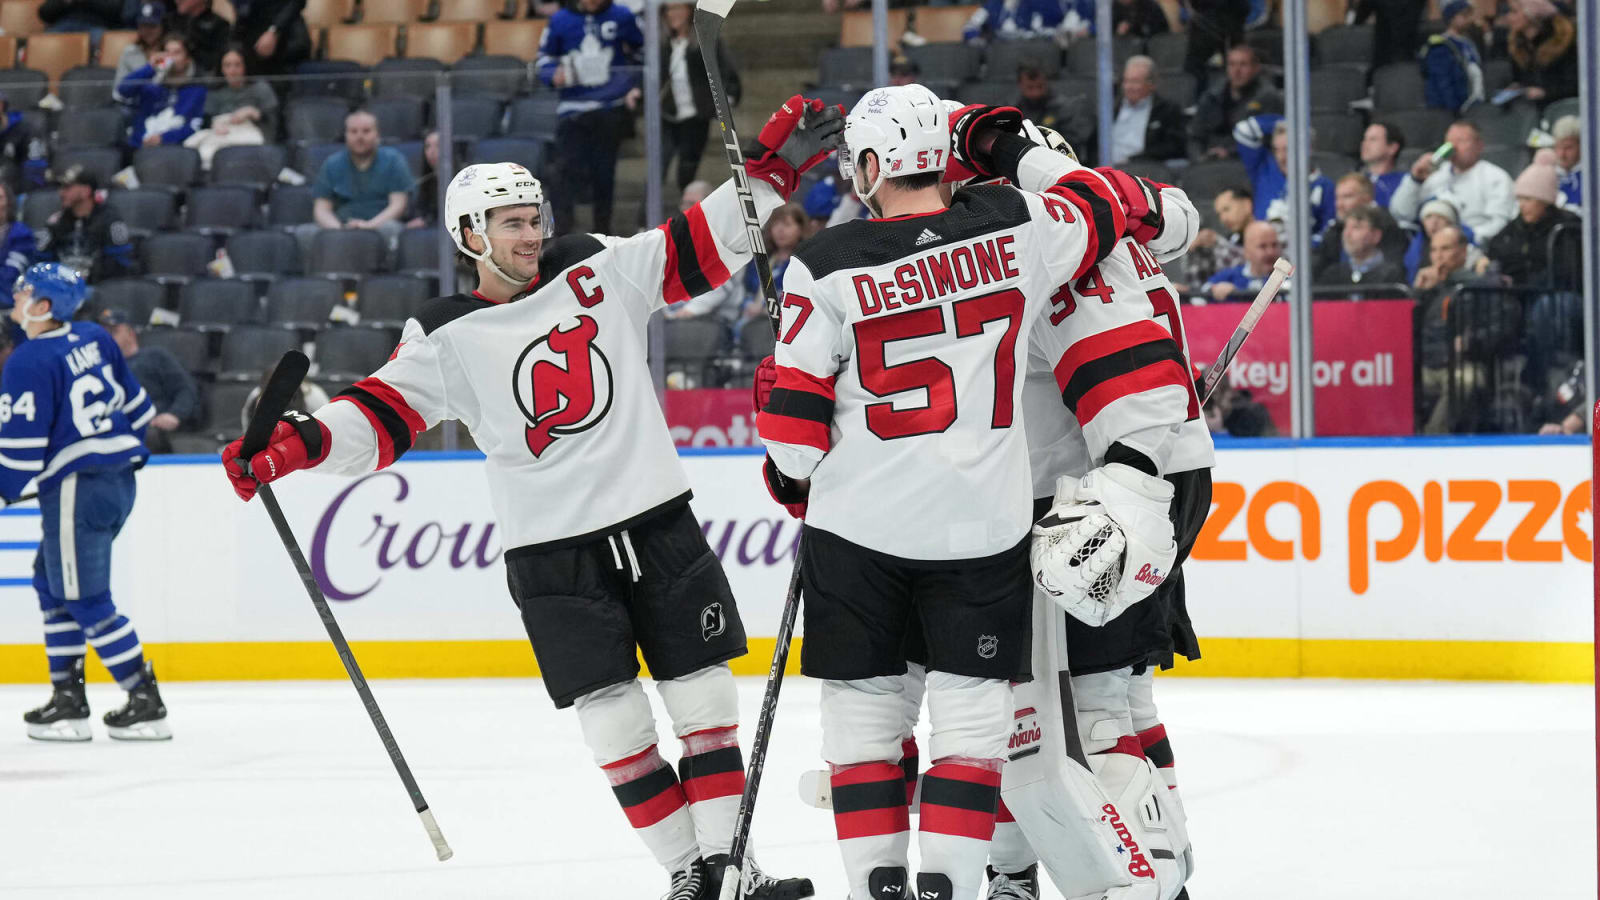 Devils’ Top Players Rally to Defeat Toronto in Offensive Showcase